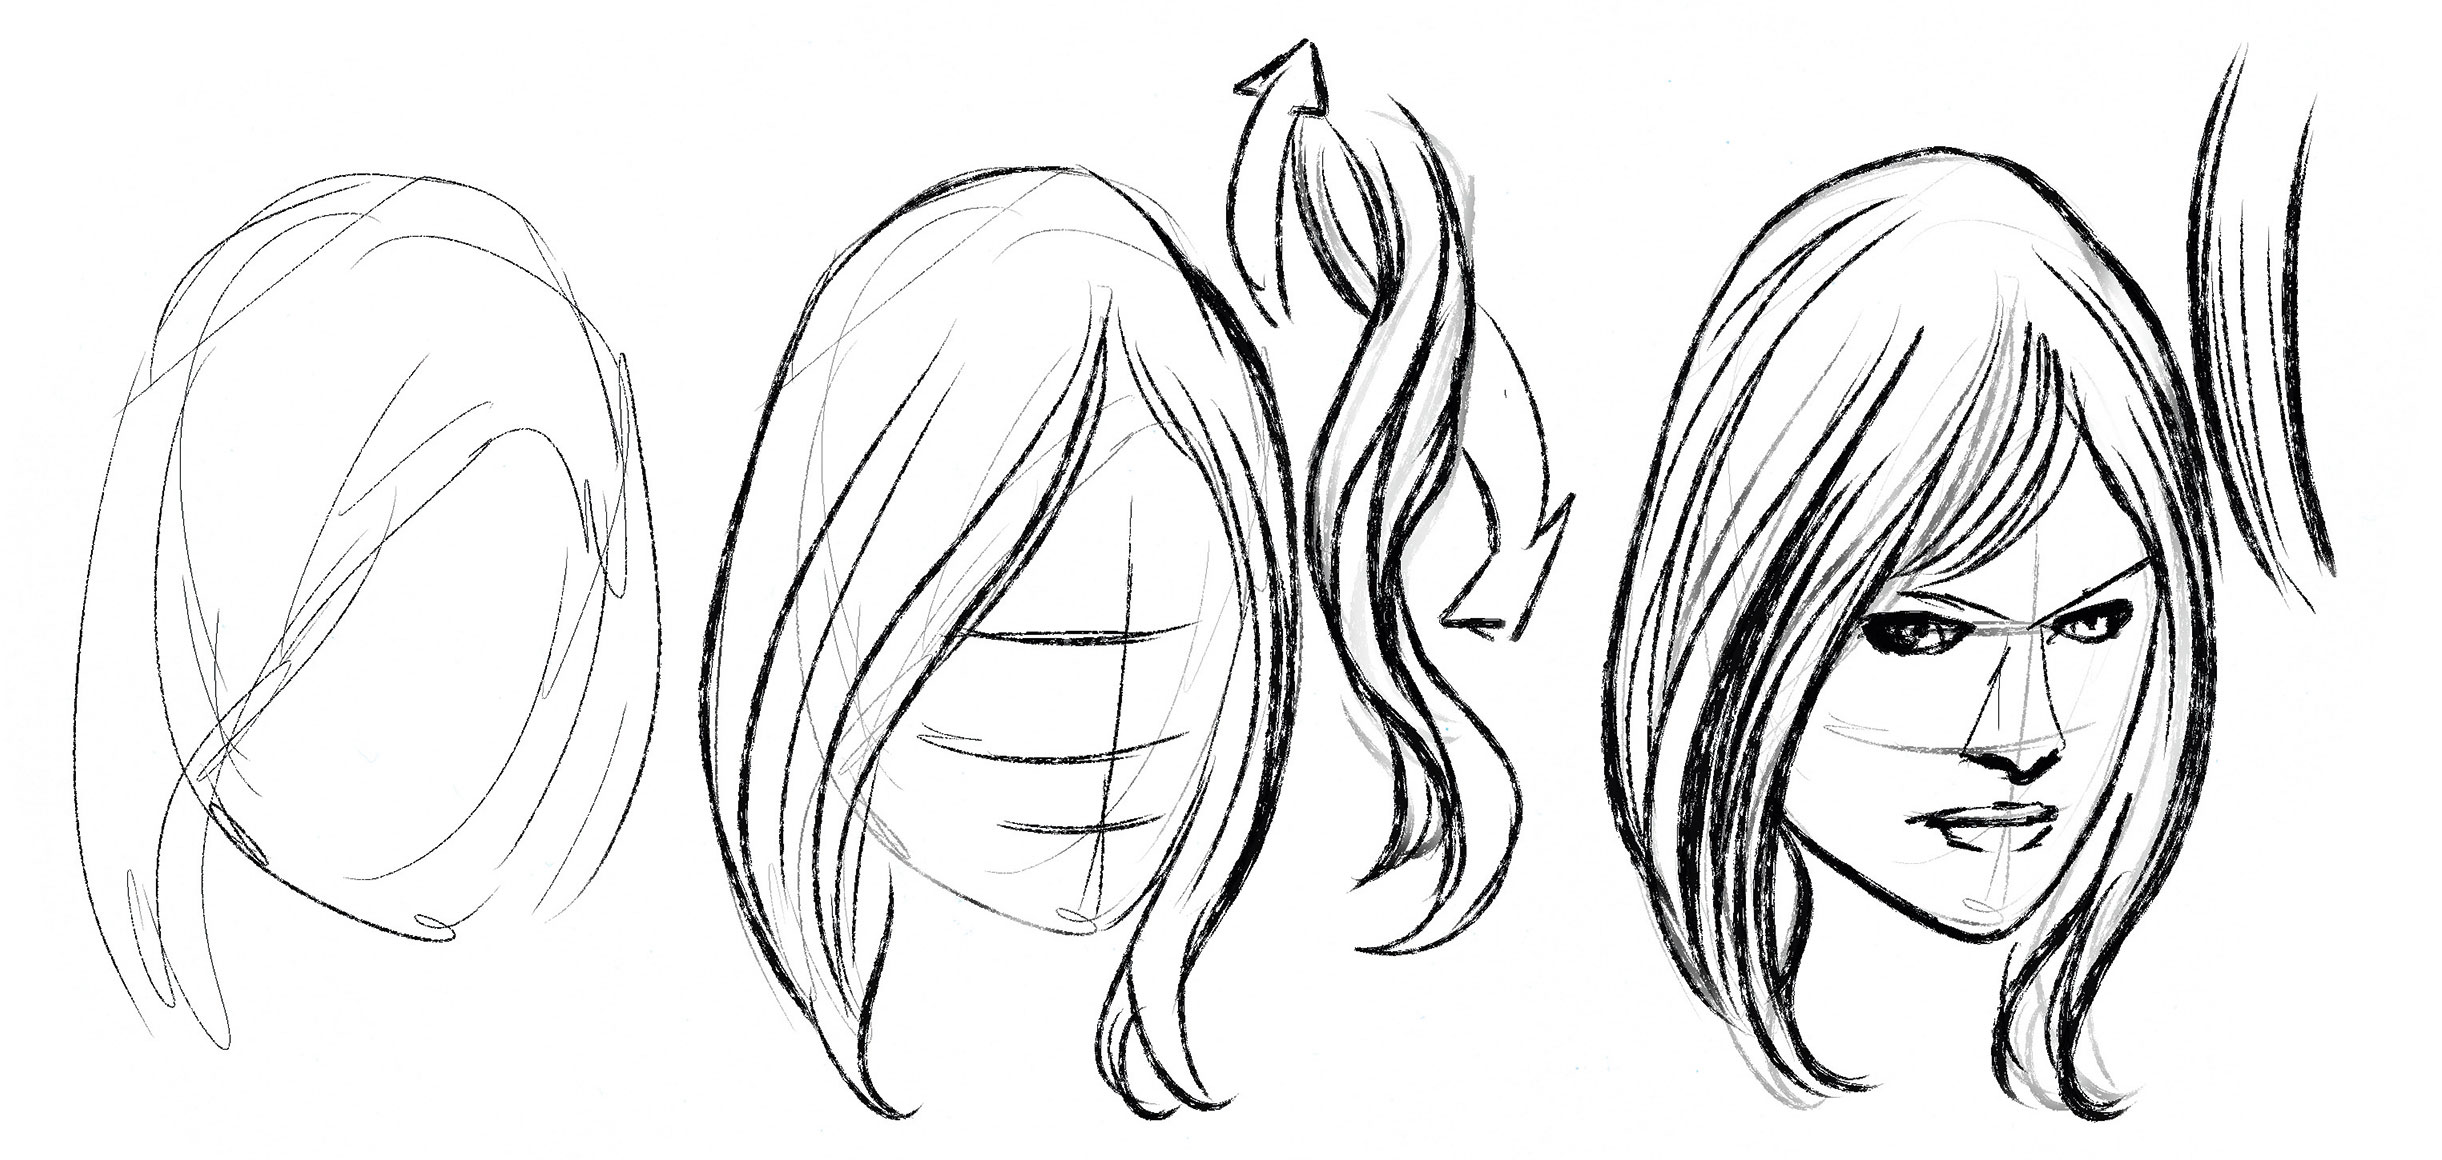 Sketches of a face with hair